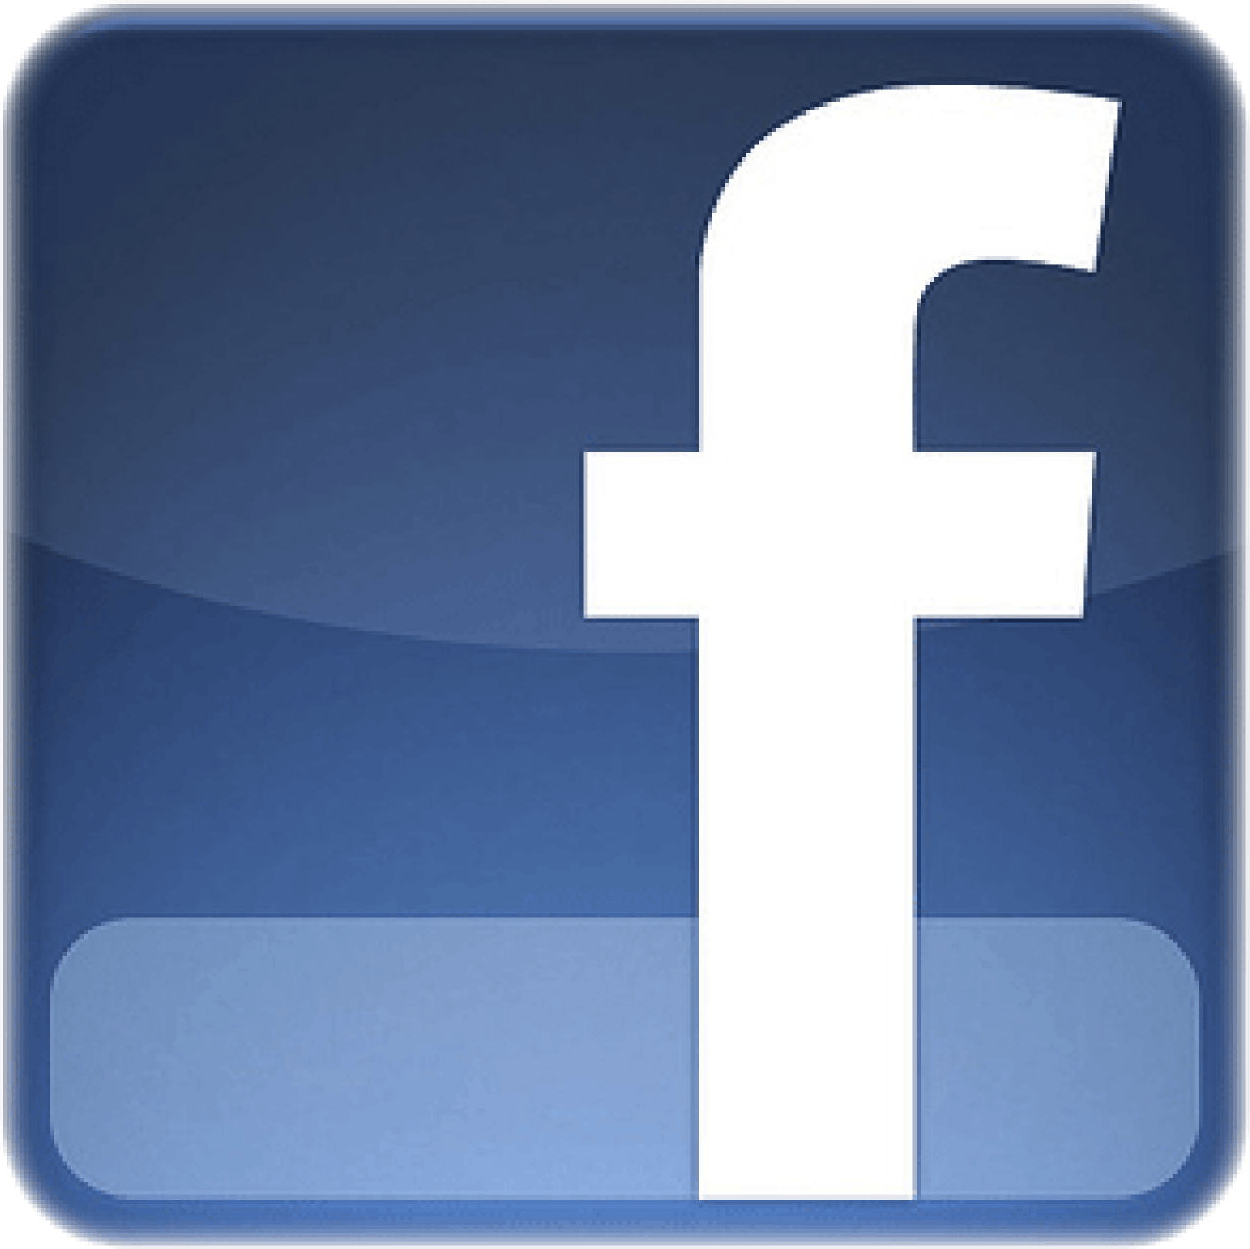 Glossy Facebook Logo - Facebook Logo Glossy Like or share Png #27 - Free Icons and PNG ...